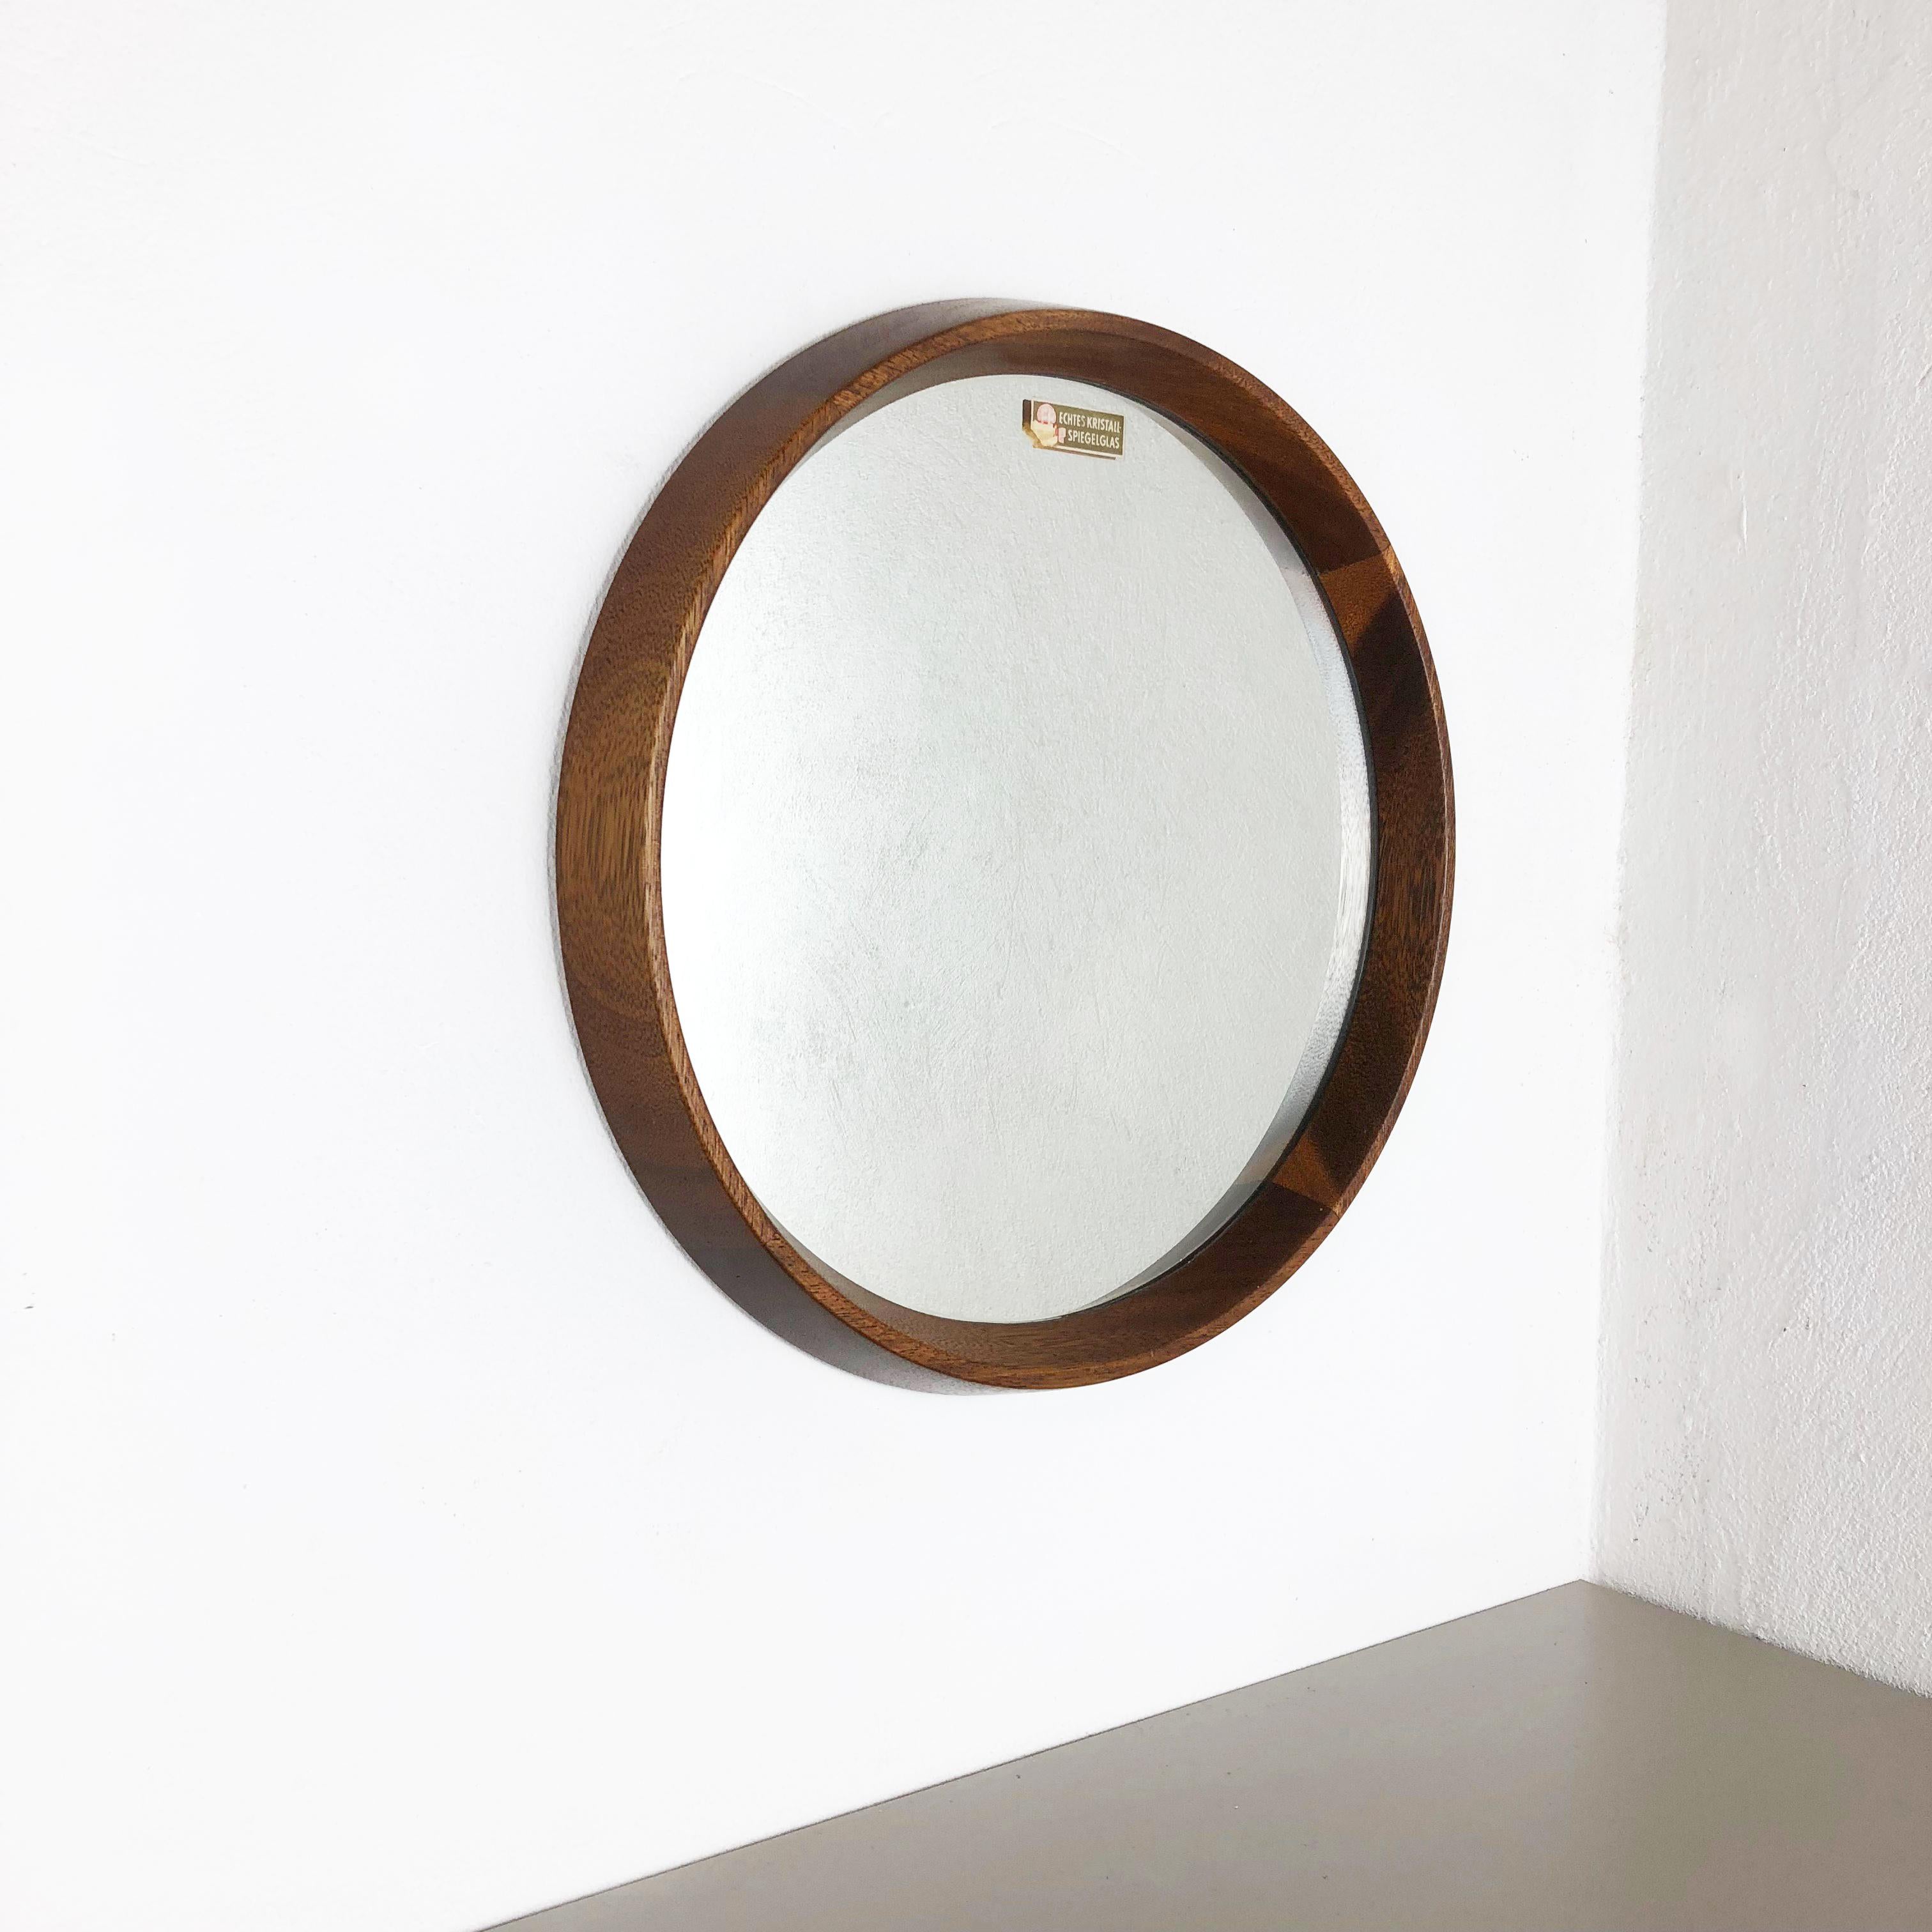 Article:

Solid wood mirror new old stock!


Origin:

Germany


AGE:

1960s


Description:

This original vintage solid wood mirror was produced in the 1960s in Germany. it is new old stock, it was stored in a shop since the 1960s,